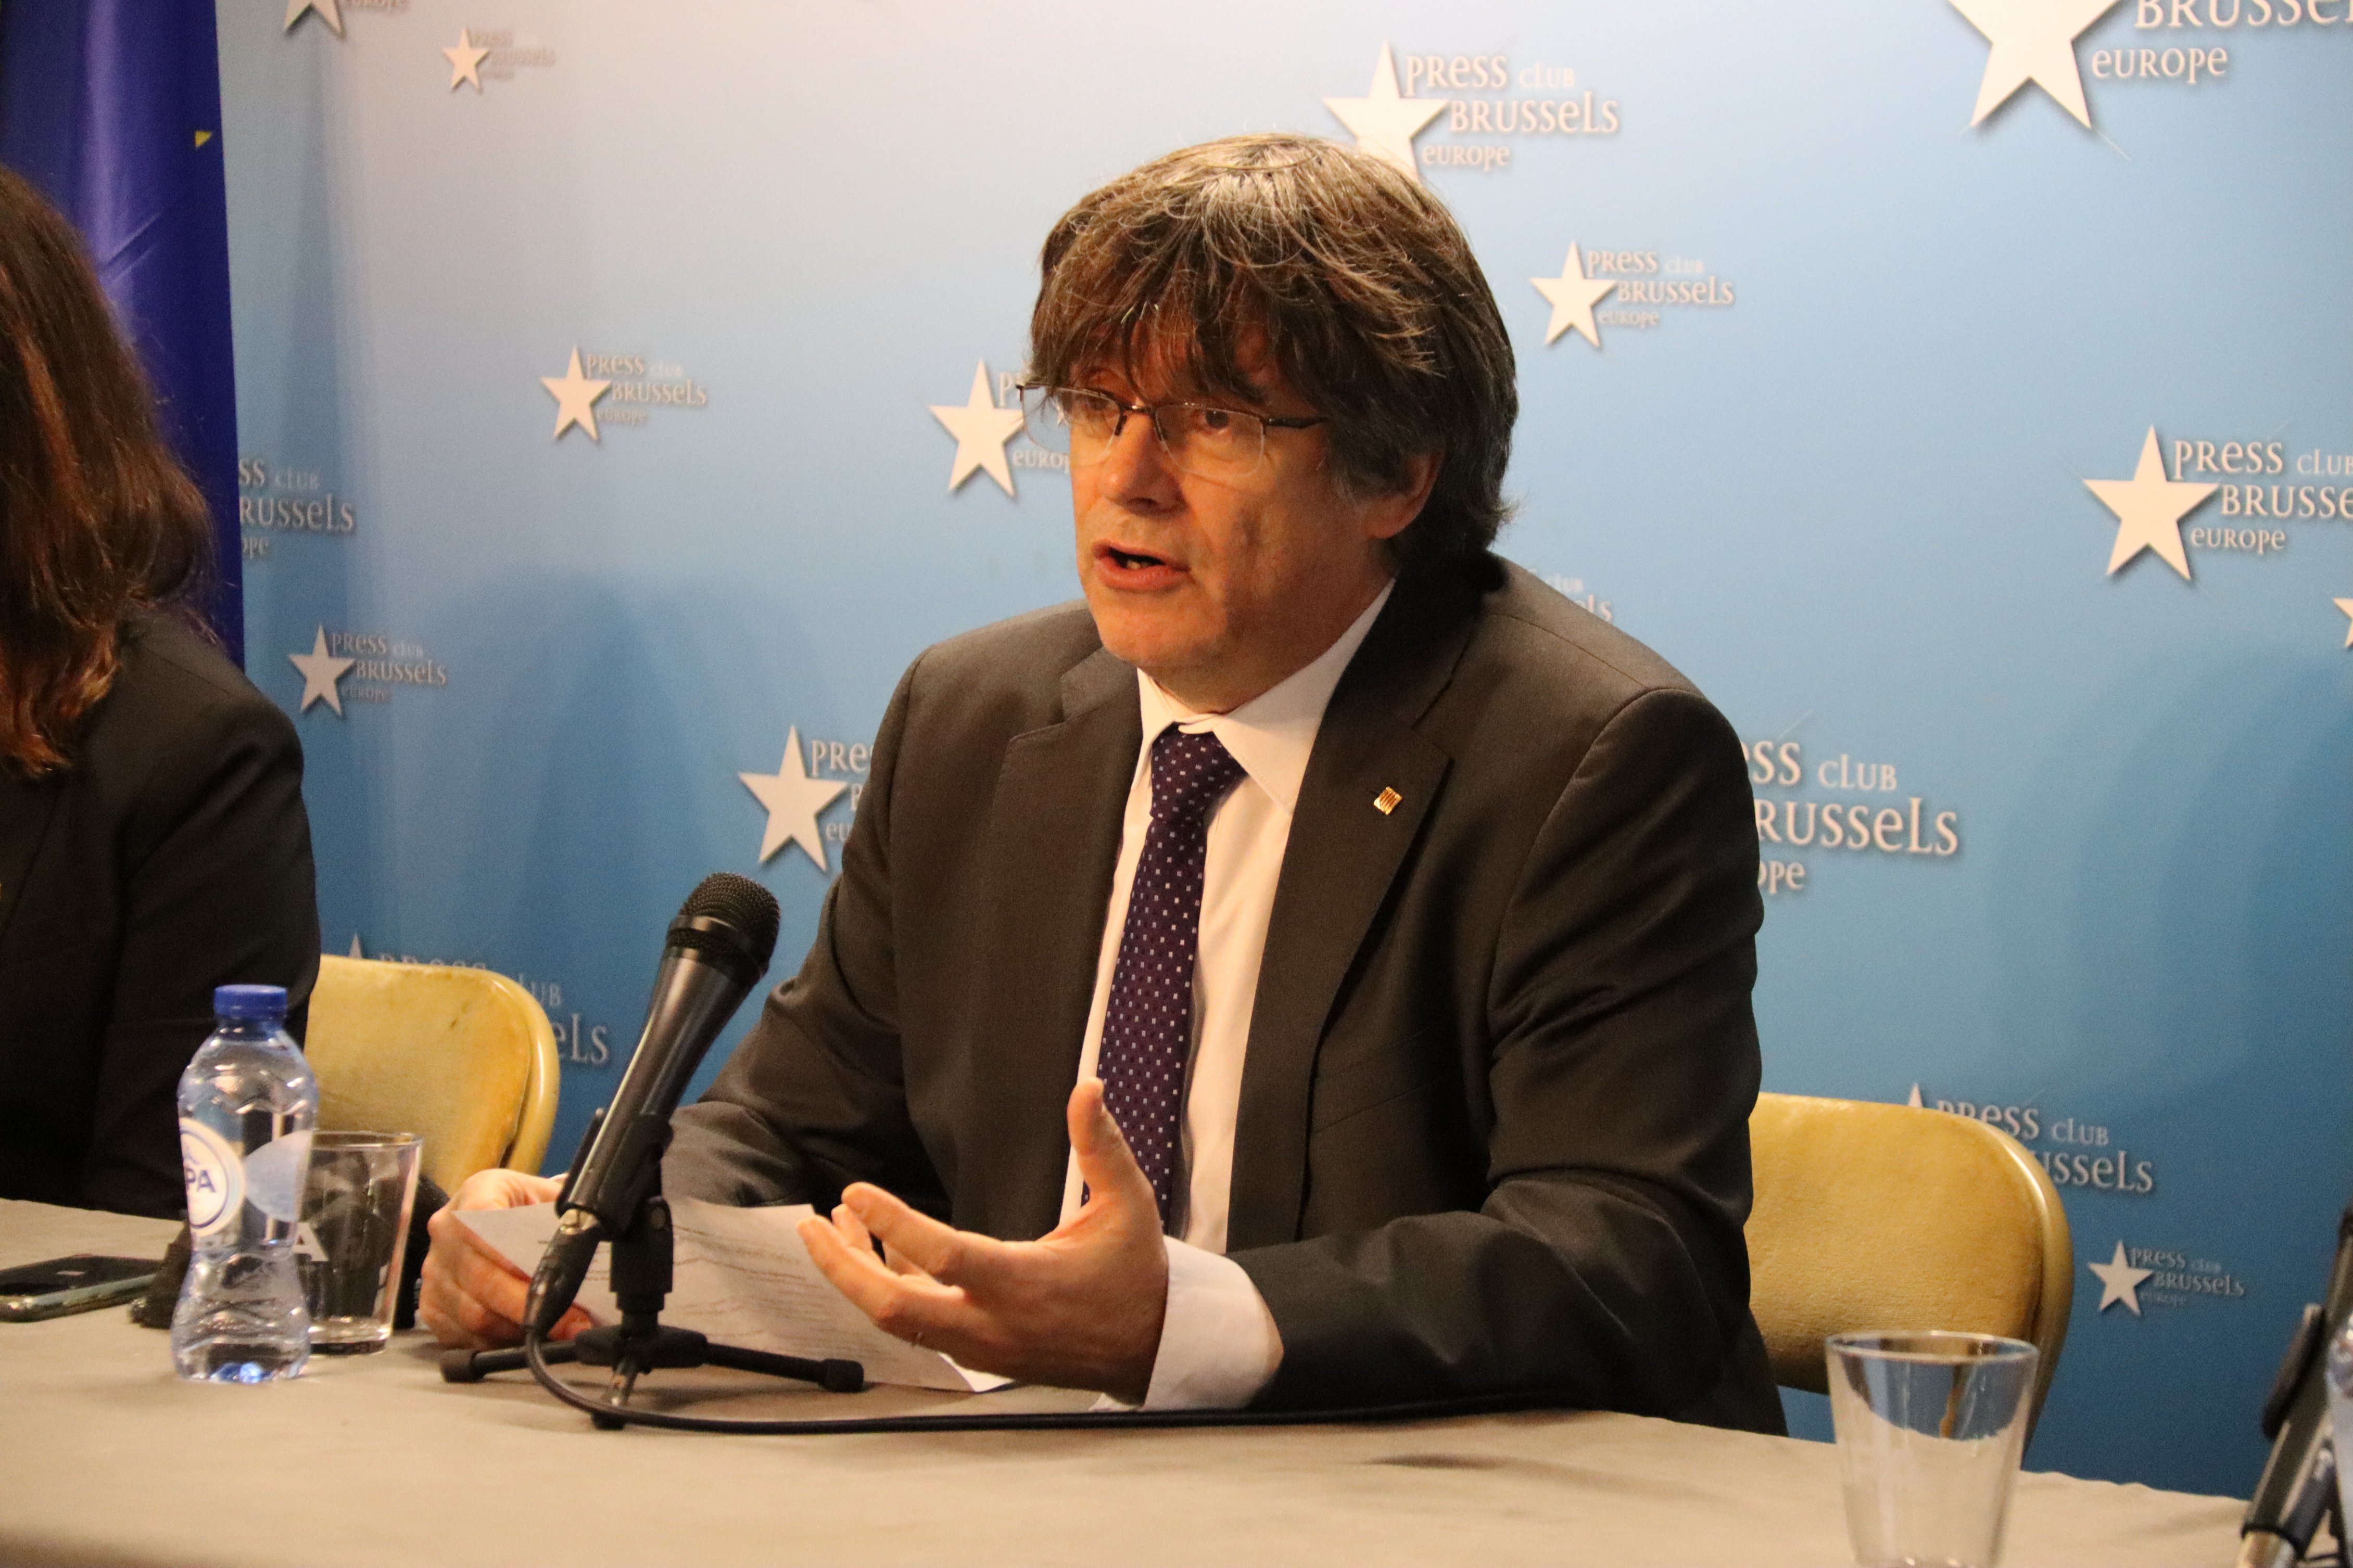 Puigdemont: "Our return will not be through personal solution nor political pact"